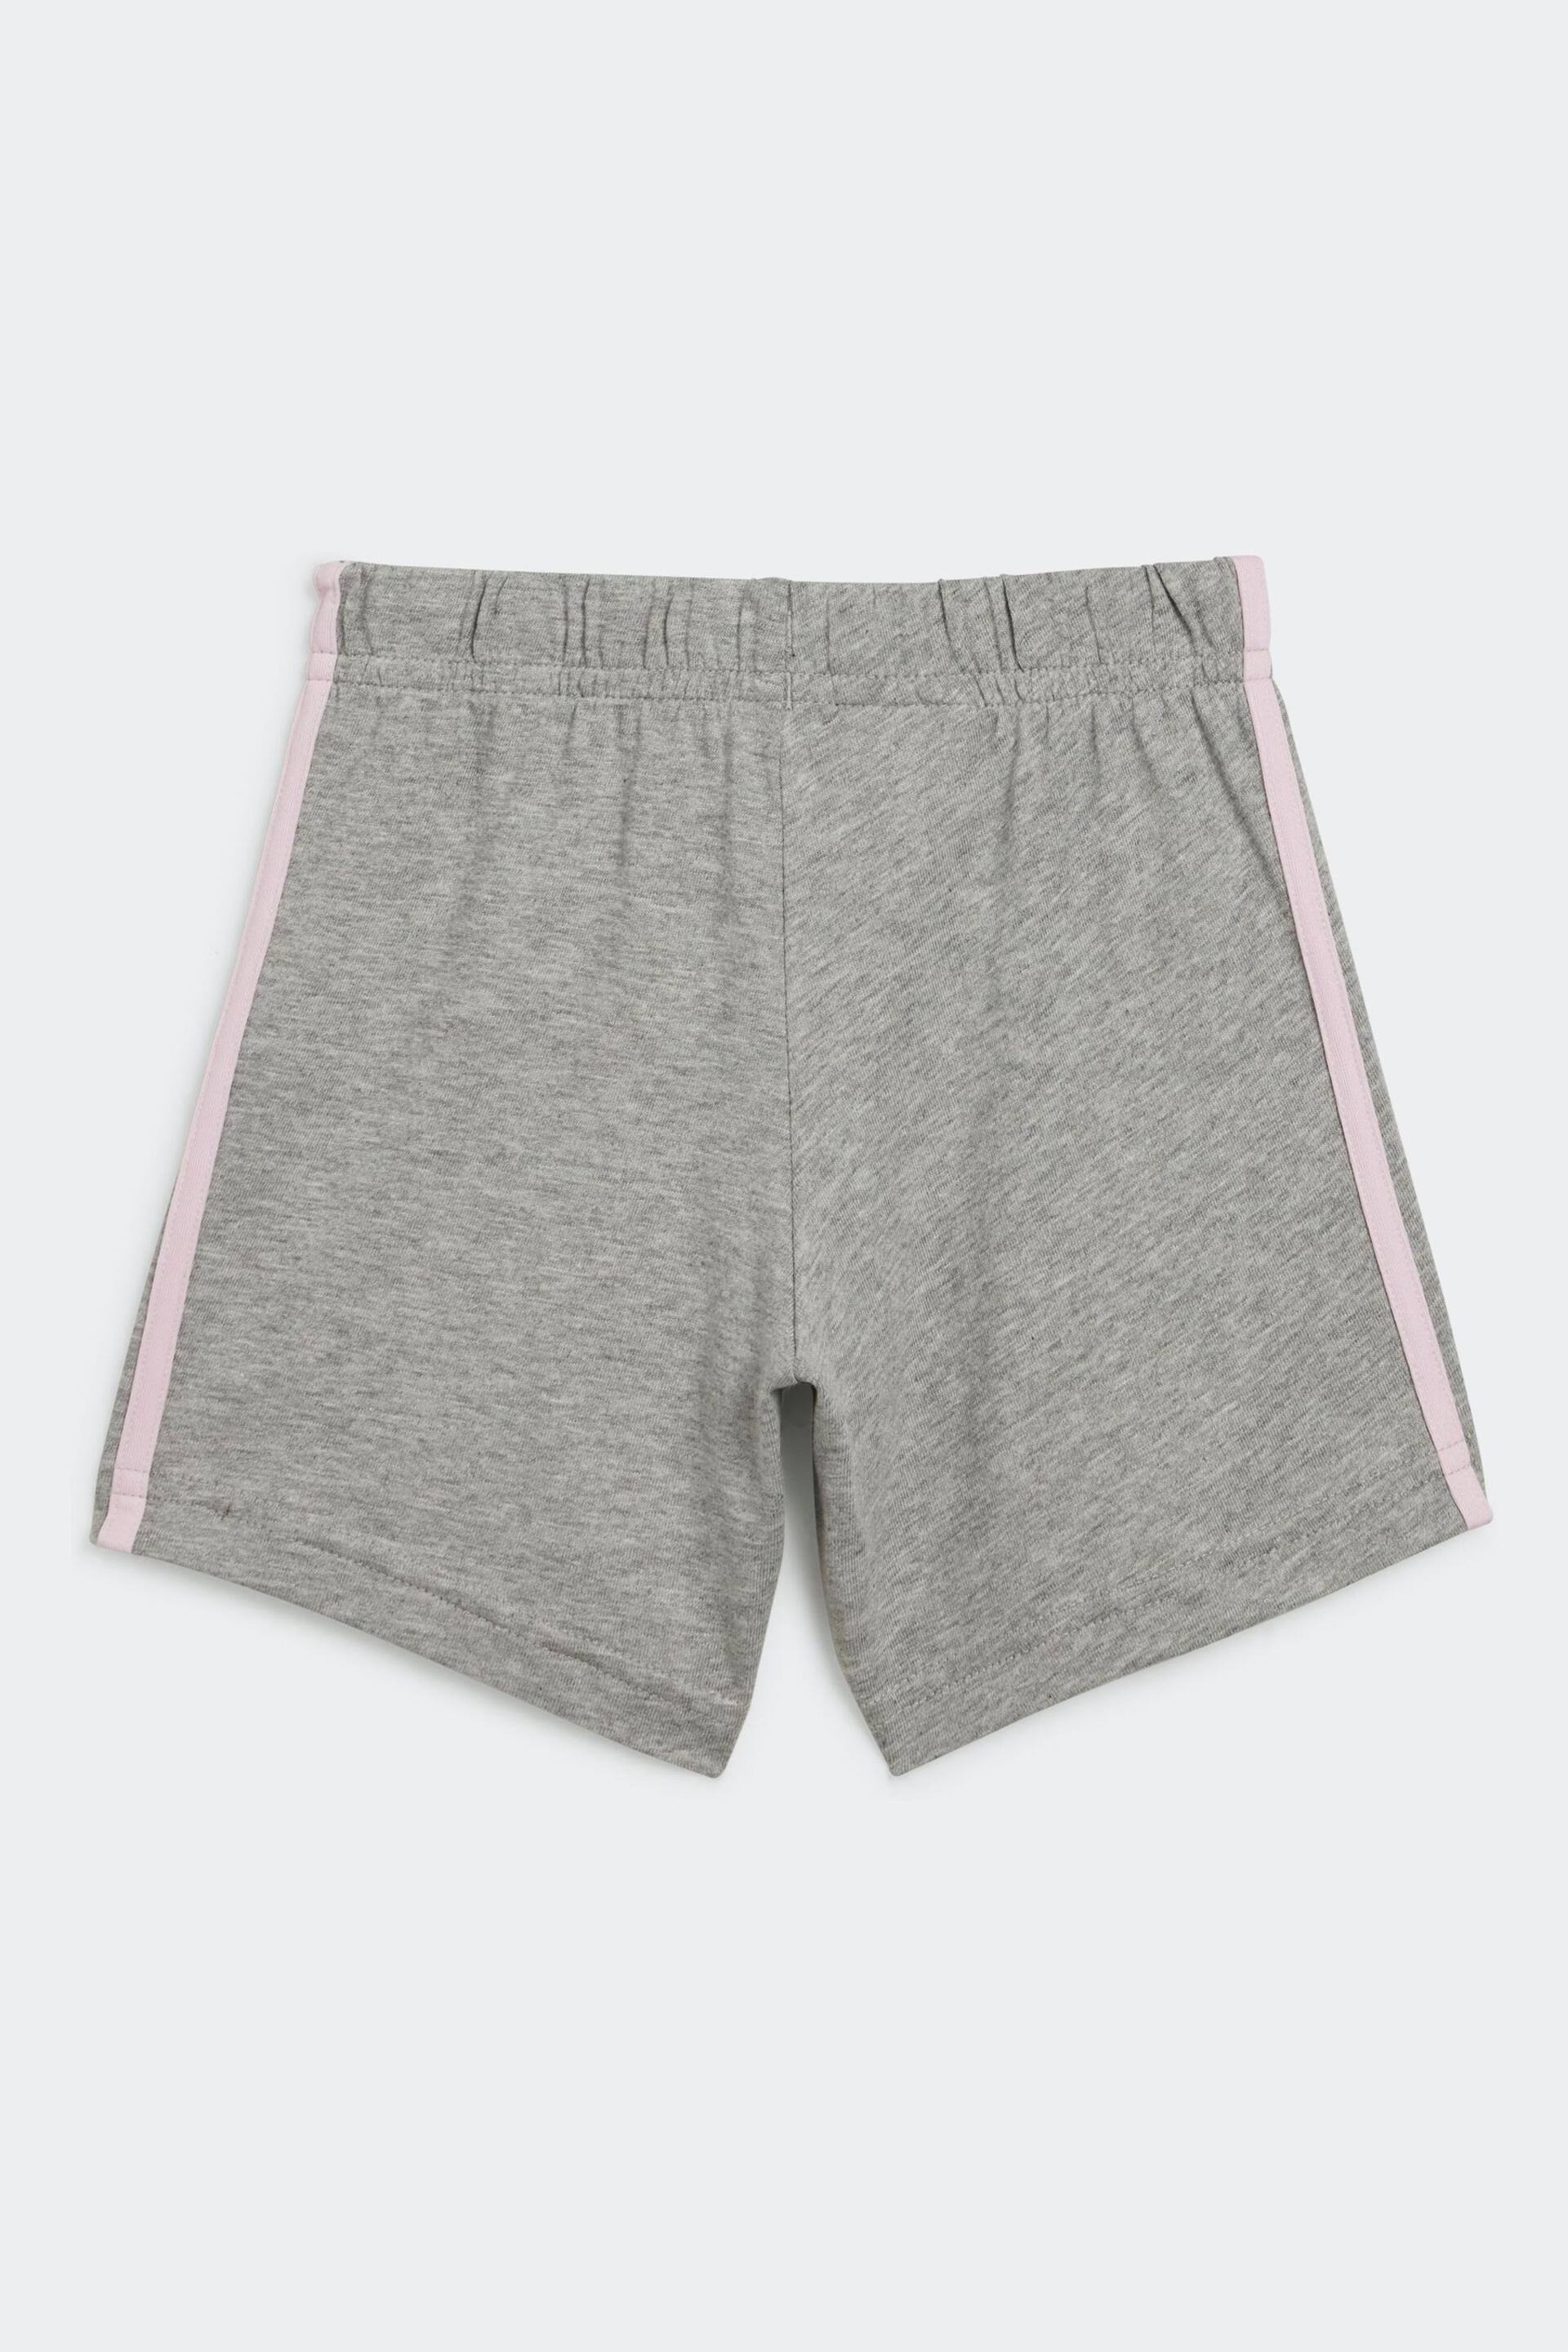 adidas Pink/Grey Sportswear Essentials Lineage Organic Cotton T-Shirt And Shorts Set - Image 3 of 6